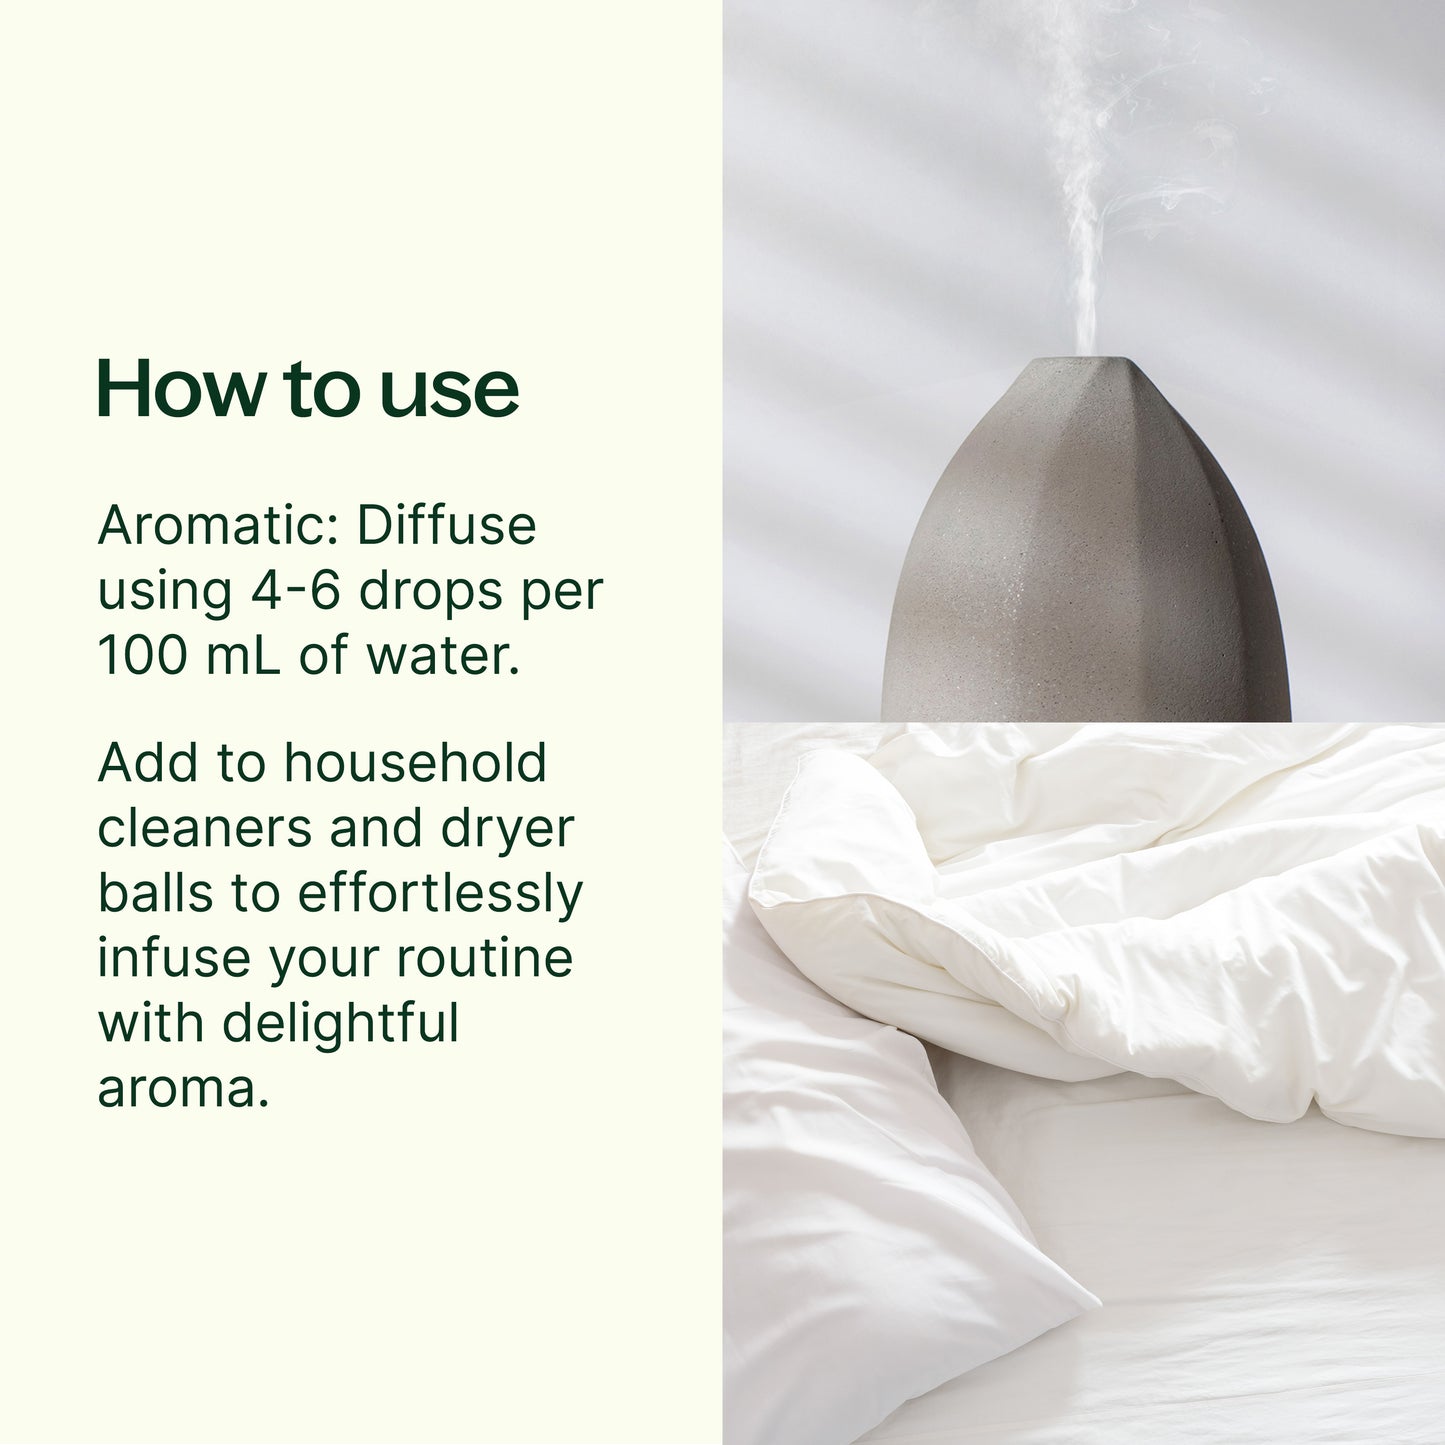 How to use: diffuse using 4-6 drops per 100 mL of water. Add to household cleaners and dryer balls to effortlessly infuse your routine with delightful aroma. 